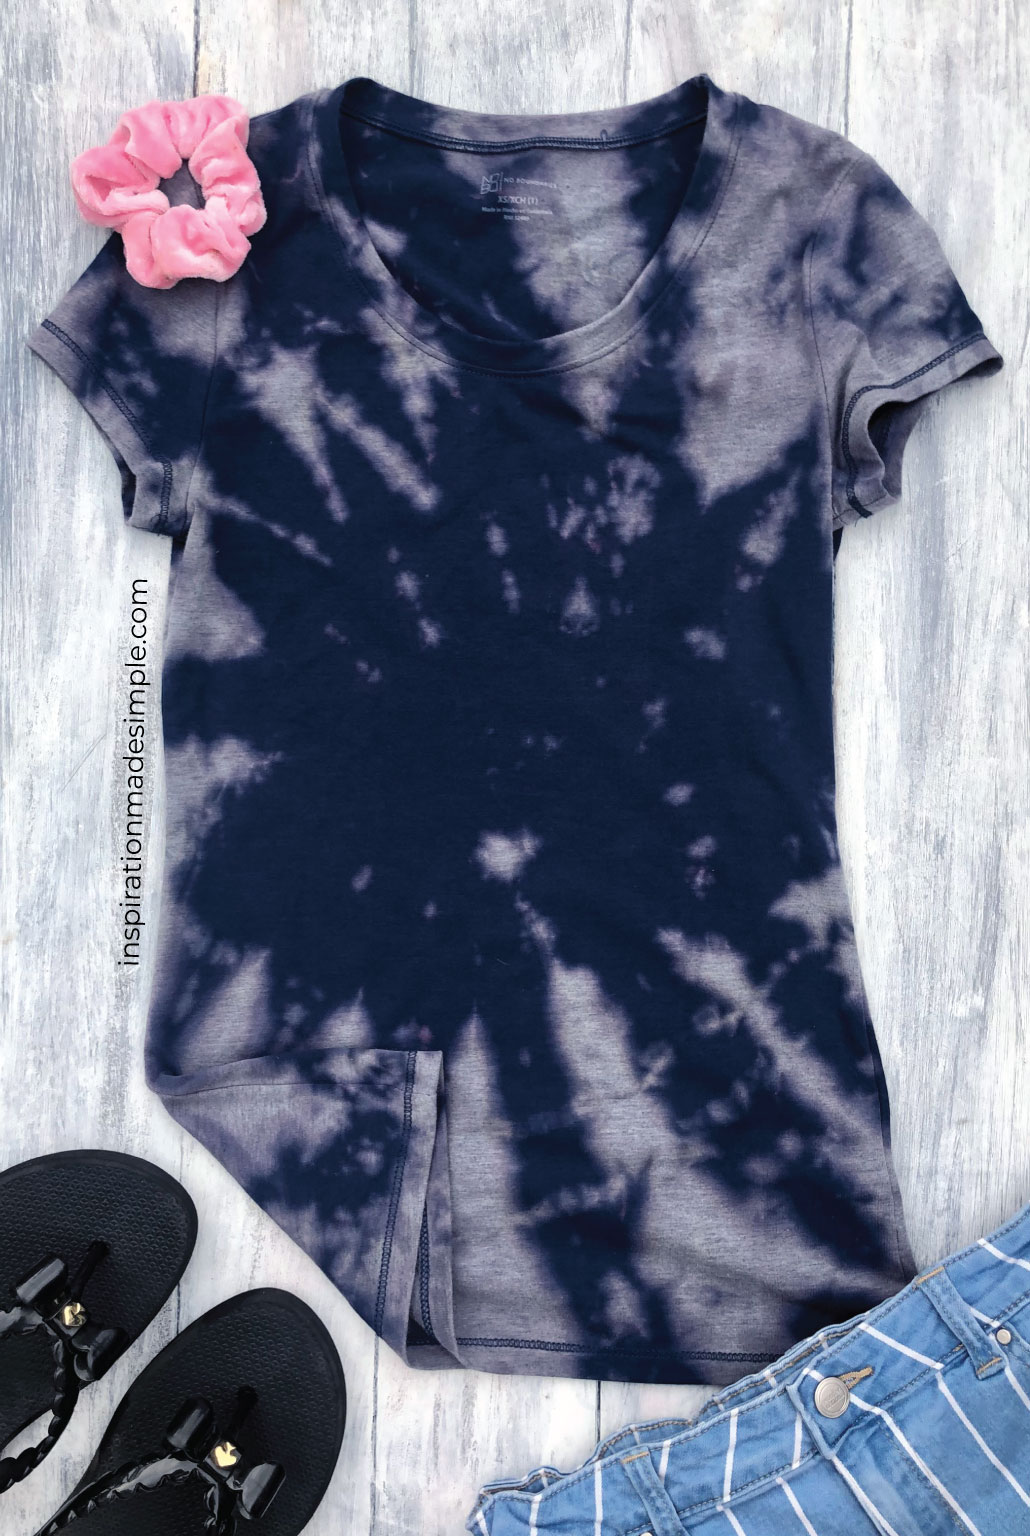 Reverse Tie Dye With Bleach Inspiration Made Simple,Lava Flow Recipe With Captain Morgan